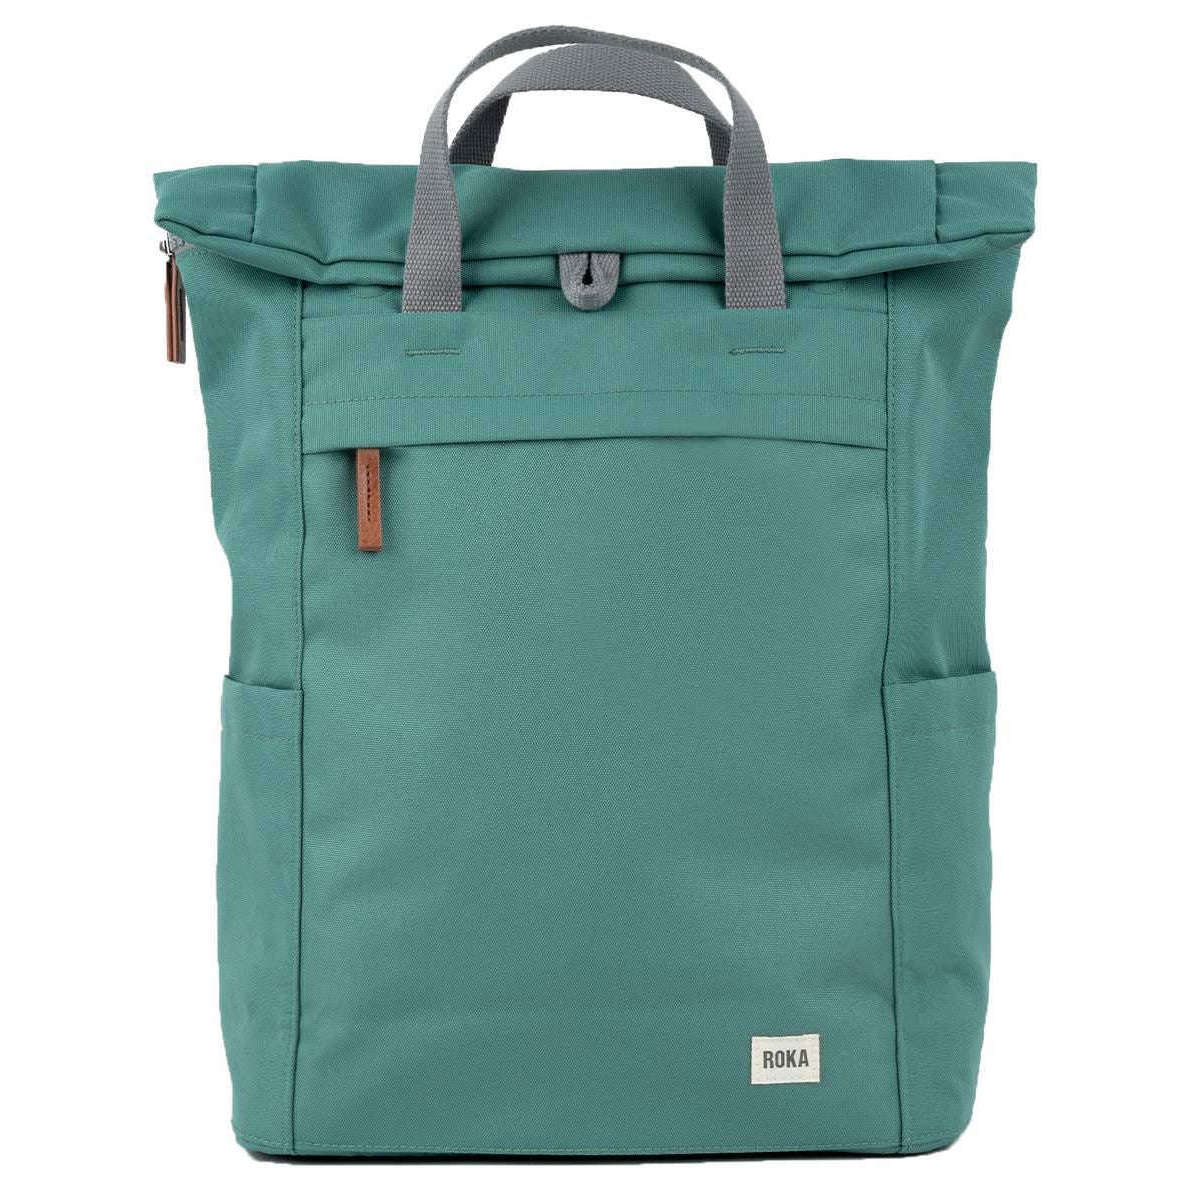 Roka Finchley A Large Sustainable Canvas Backpack - Sage Green